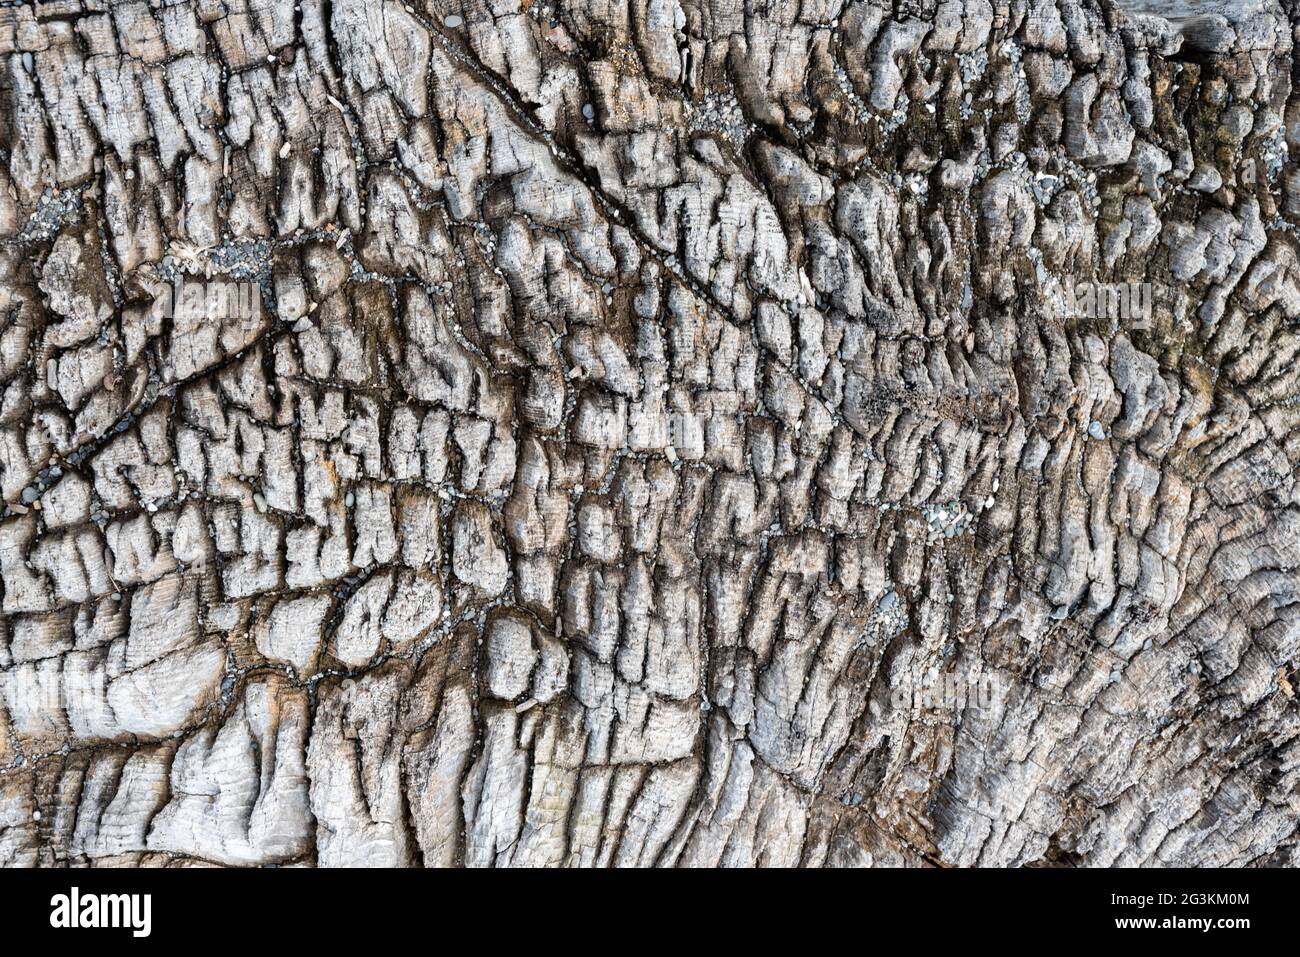 Well weathered silver driftwood showing grain and texture Stock Photo